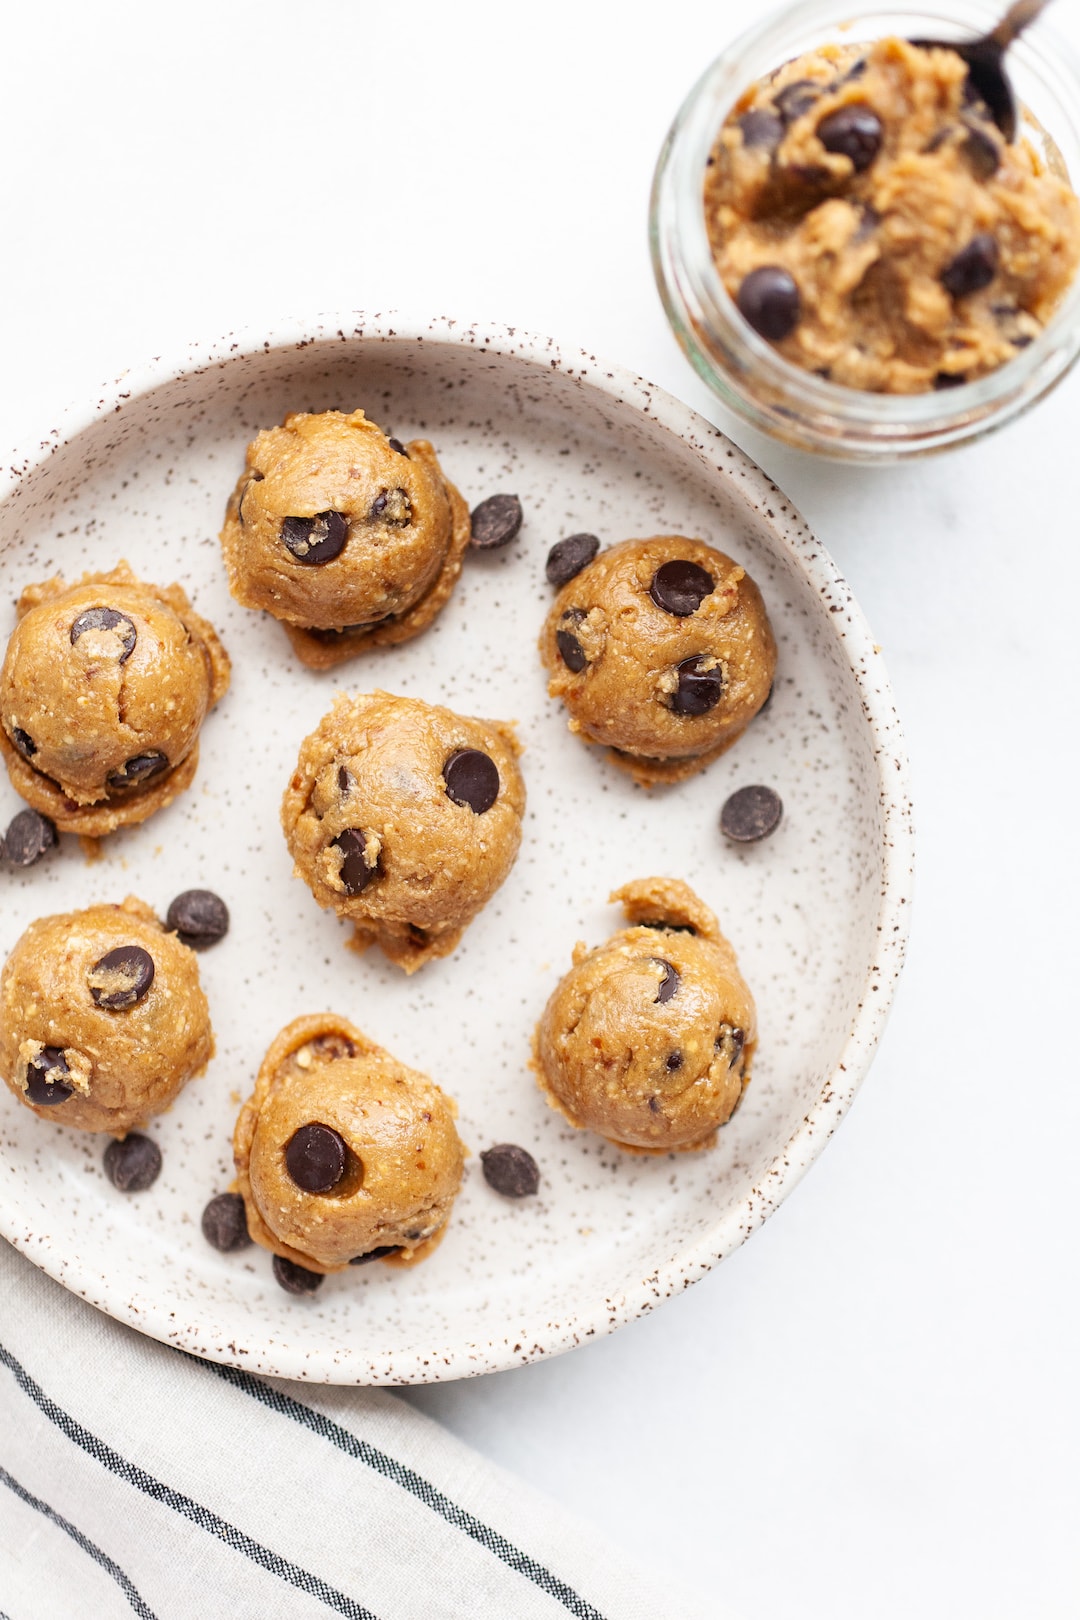 This delicious and healthy edible vegan chocolate chip cookie dough recipe is so easy to make it takes just 5-minutes. It can be enjoyed for one or for two with a spoon or as a dip for apples or other fruit! It’s made with no milk, no flour, no butter, and it’s egg free so it’s safe to eat raw. Grab a spoon and dig in!